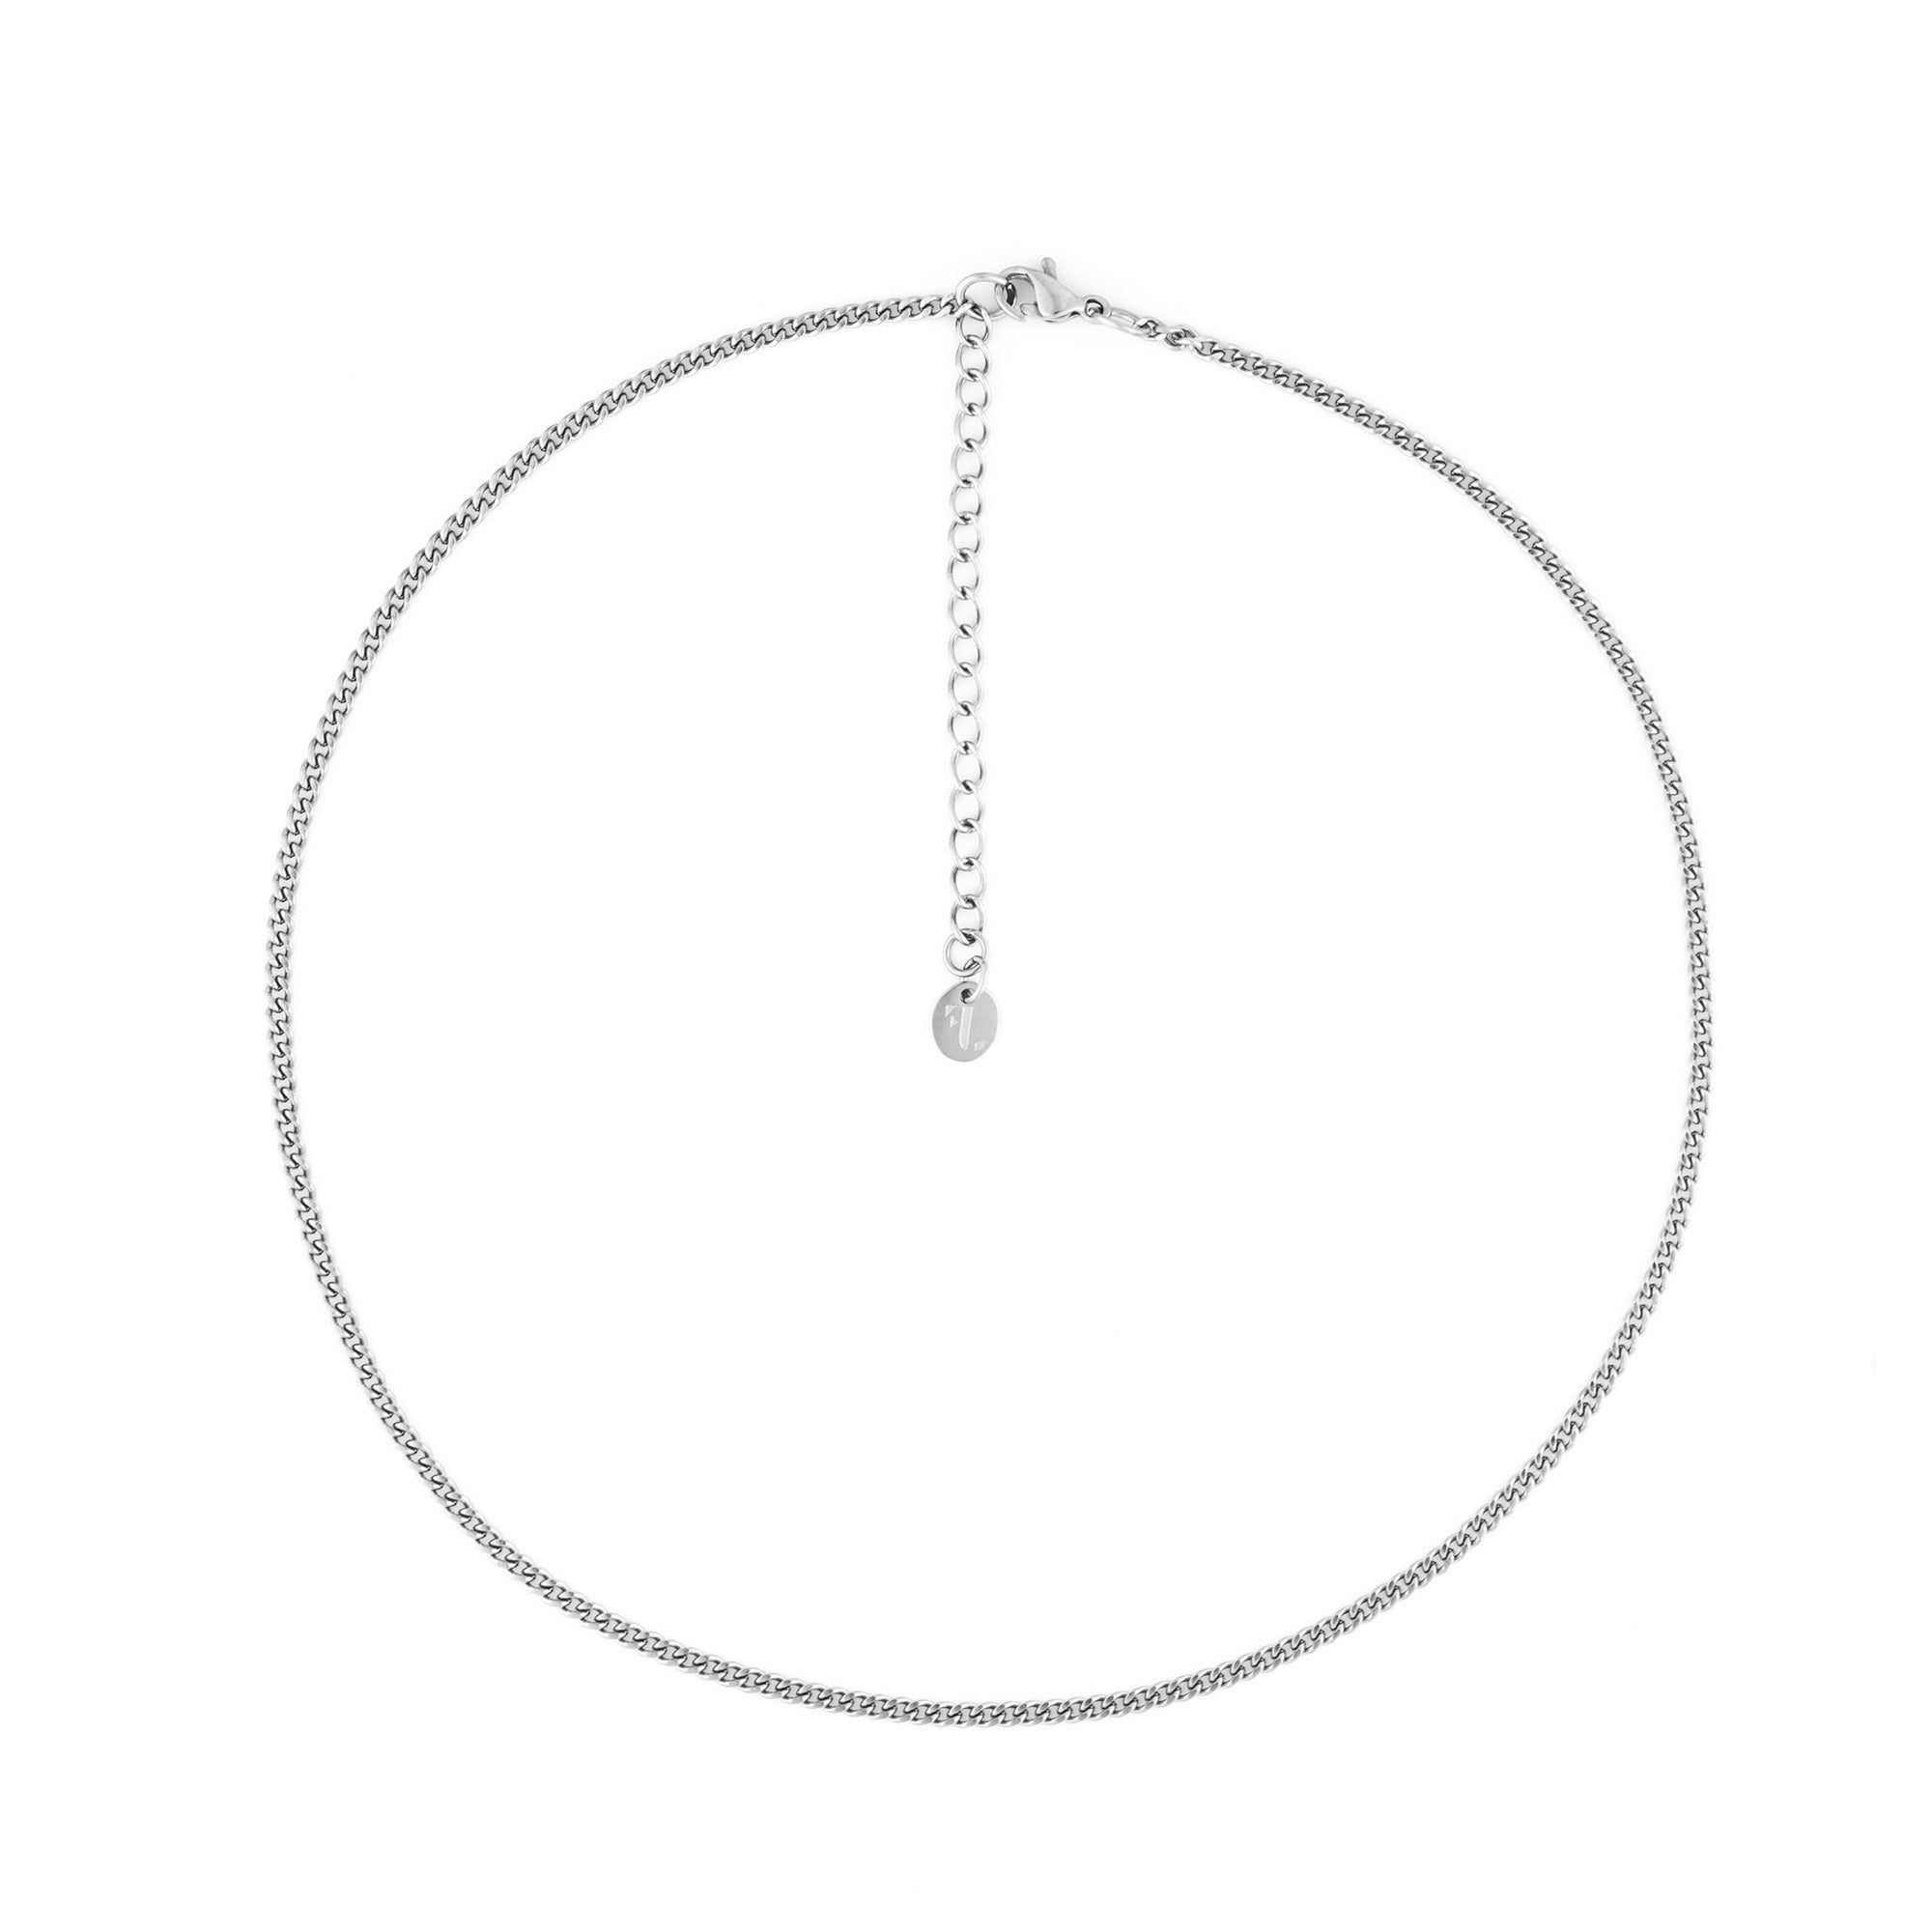 fj watches loen necklace chain stainless steel silver argent plated acier inoxydable 2mm curb thin femme women collier chaine mince